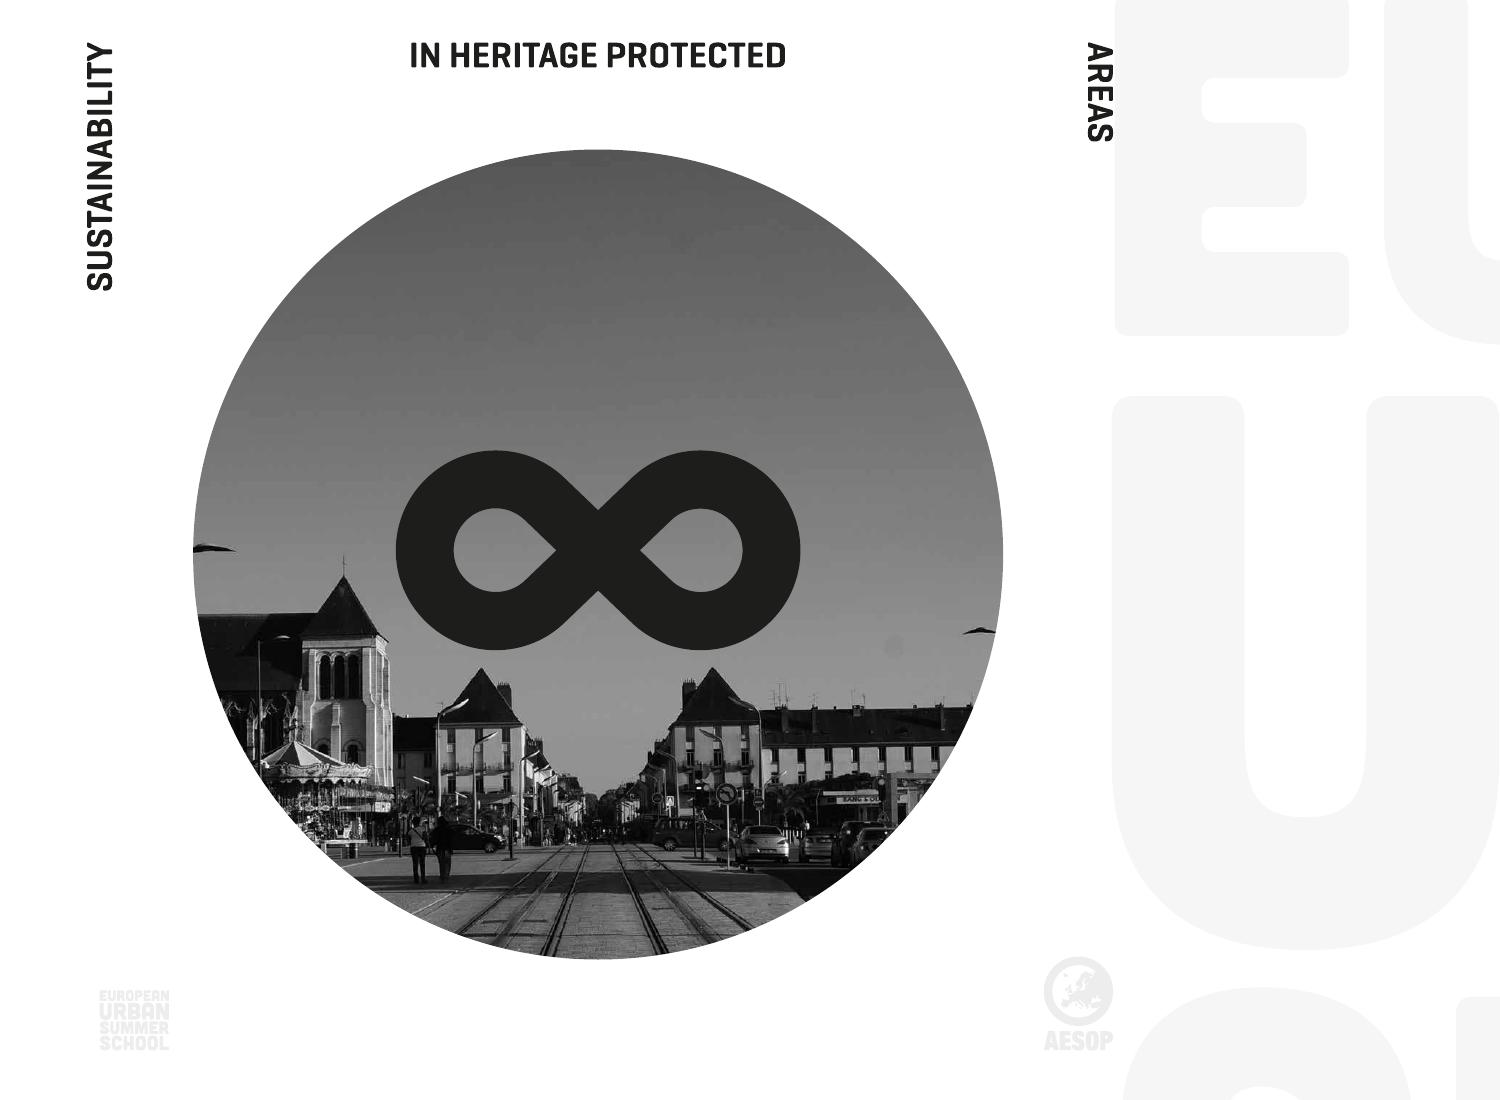 Meridienne Jardin Unique Sustainability In Heritage Protected areas by Haveasign issuu